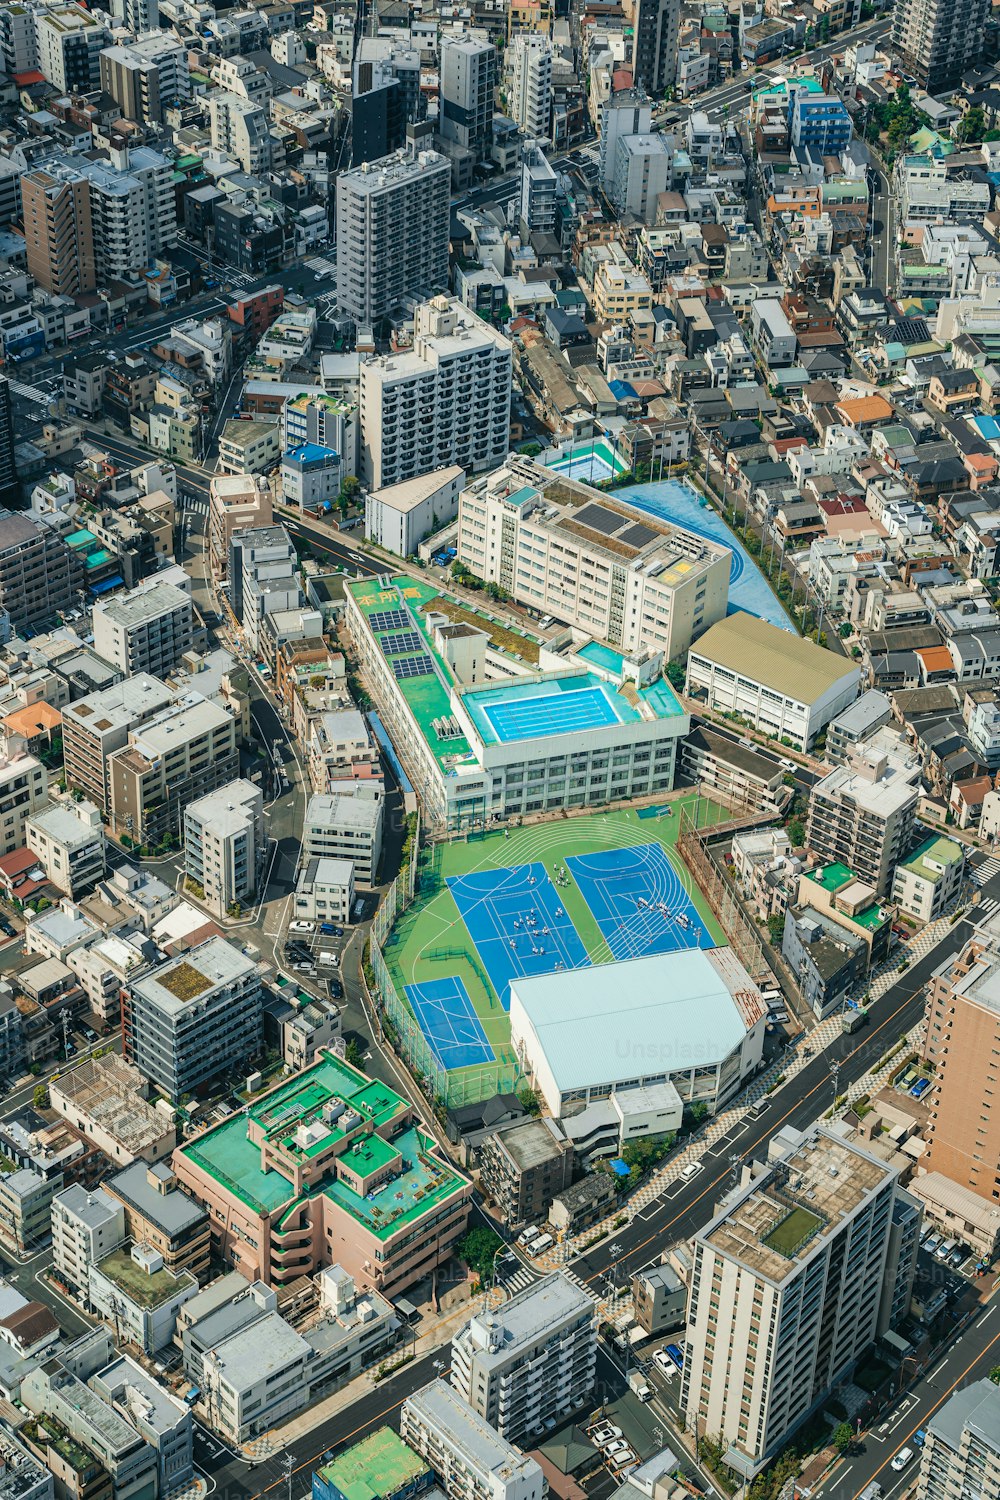 an aerial view of a city with a tennis court